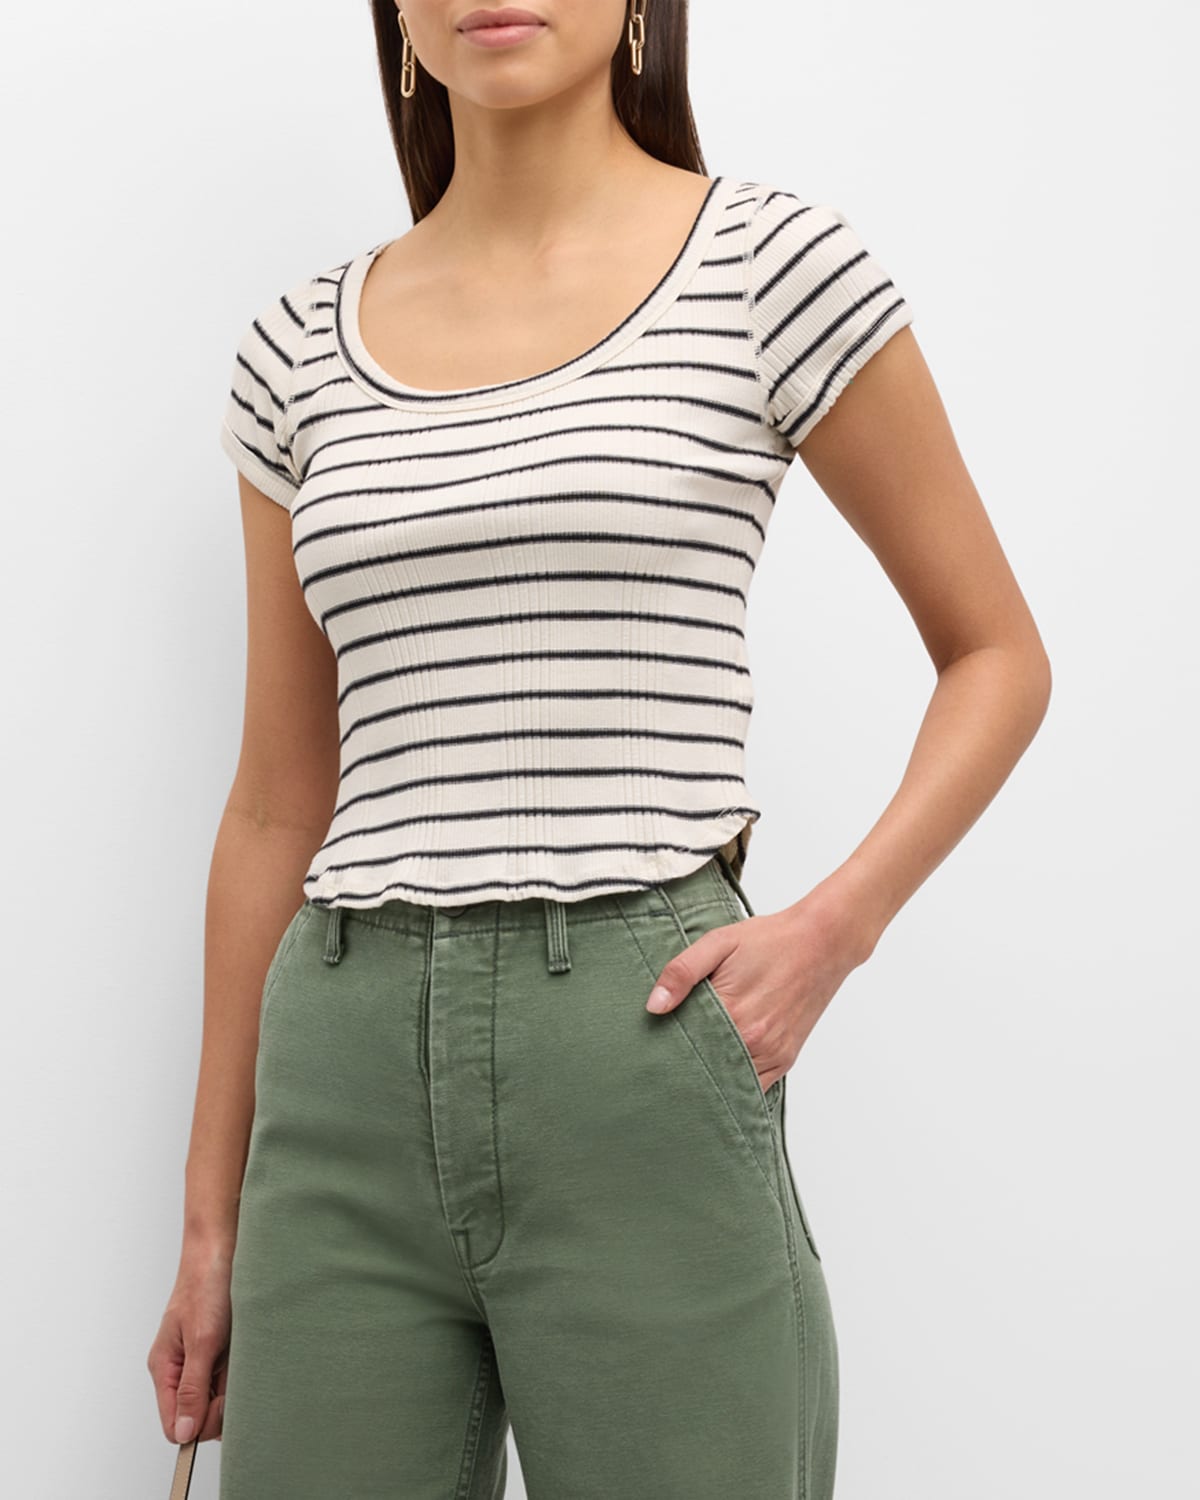 The Itty Bitty Scoop Striped Tee